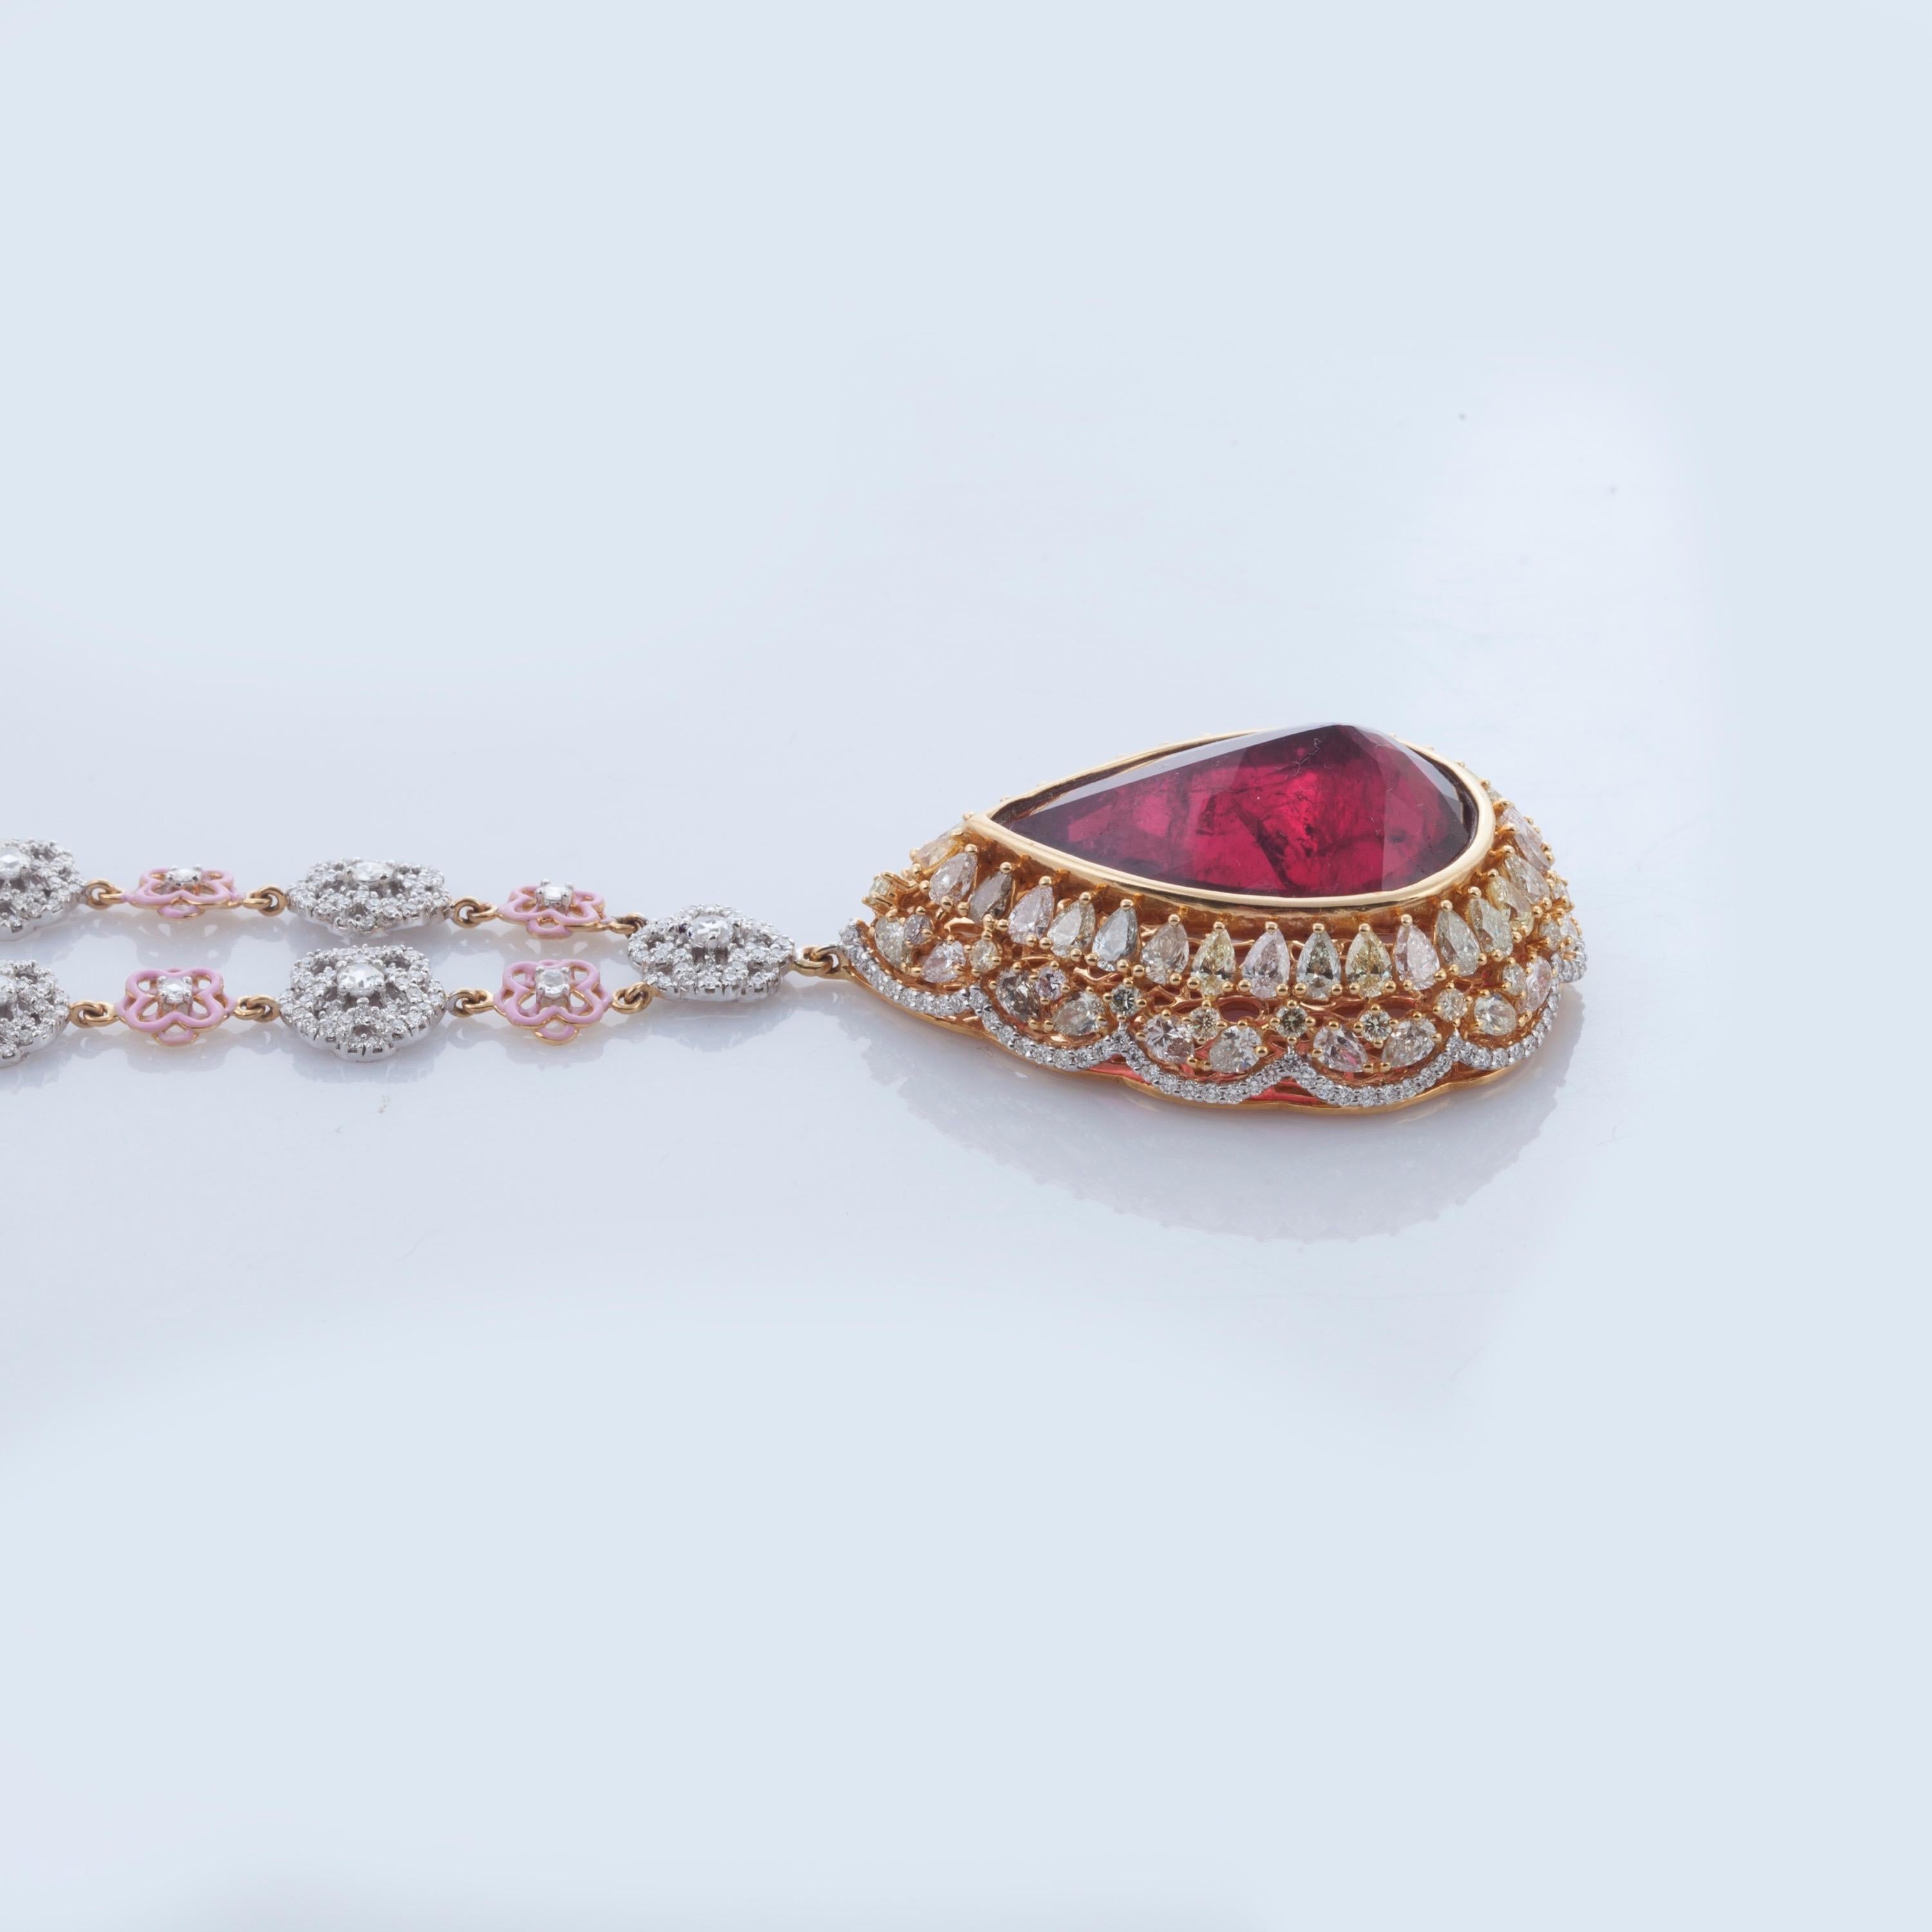 The rosette window above the beautiful gateway of the Strasbourg Cathedral envelopes the beautiful 25.51 carat Rubelite set in reverse with natural fancy colored Pear Shaped diamonds suspended on a beautiful Rosetta motif alternately studded in